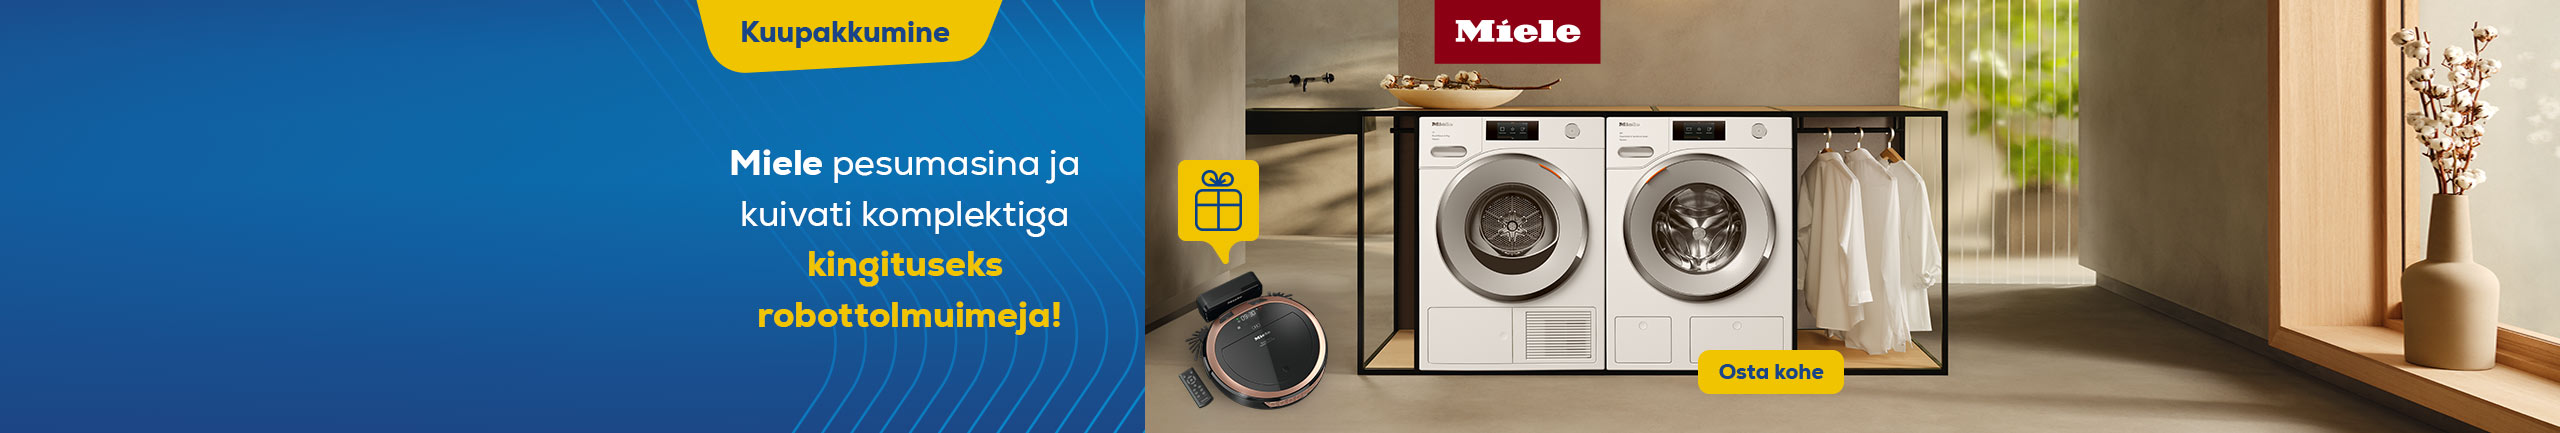 Buy Miele washer and dryer set and receive a complimentary gift